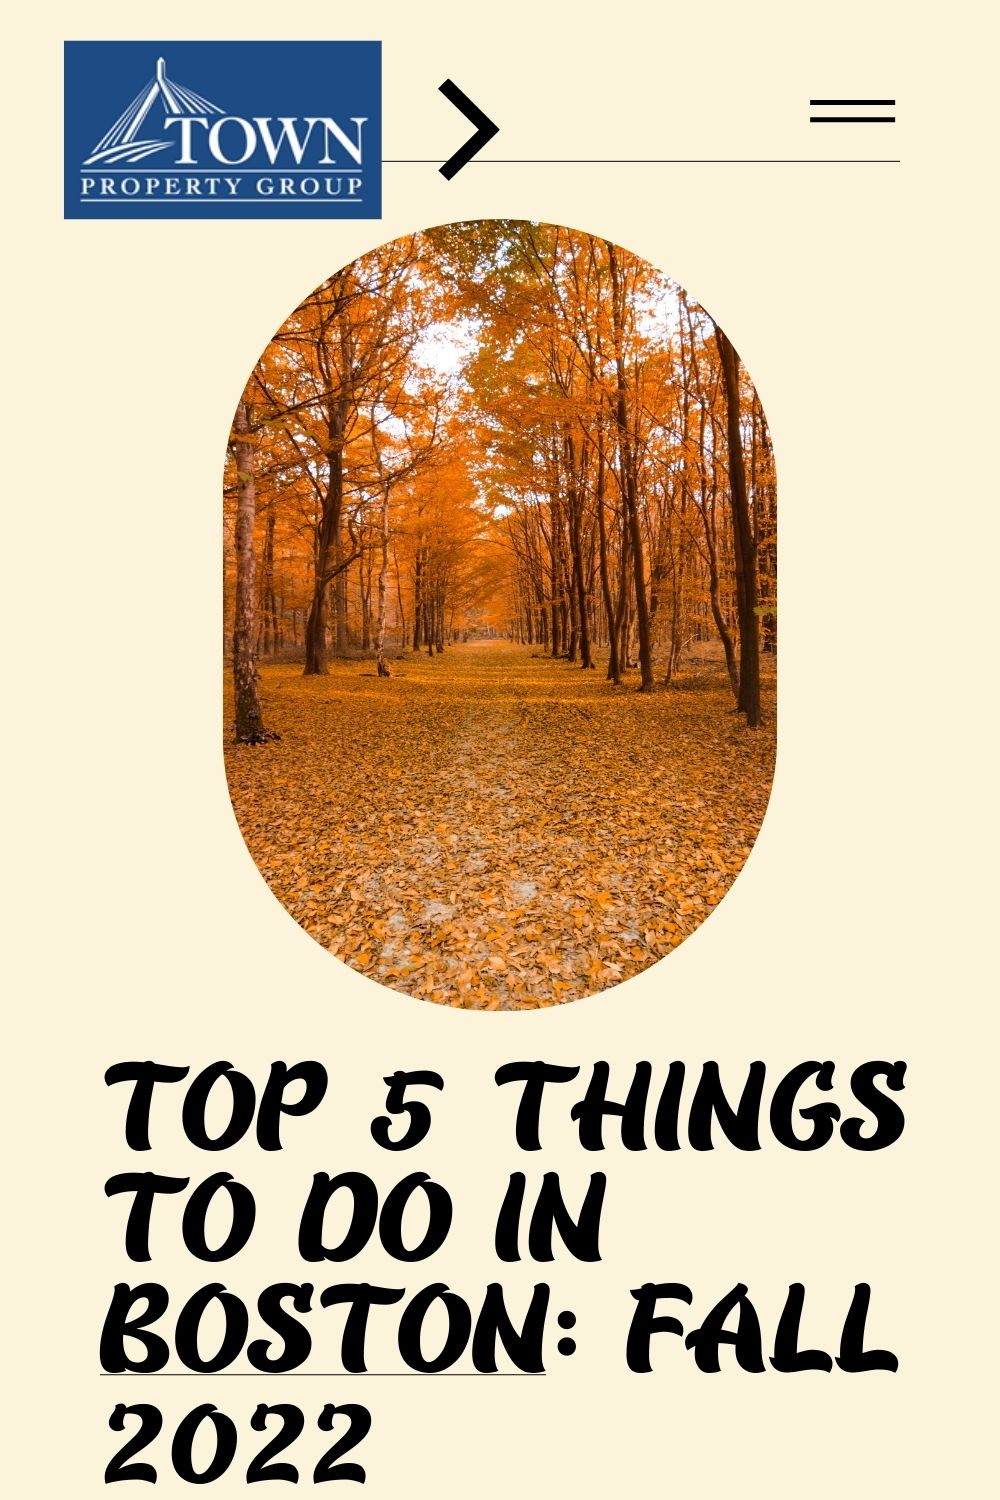 Top 5 Things to do in Boston Fall 2022